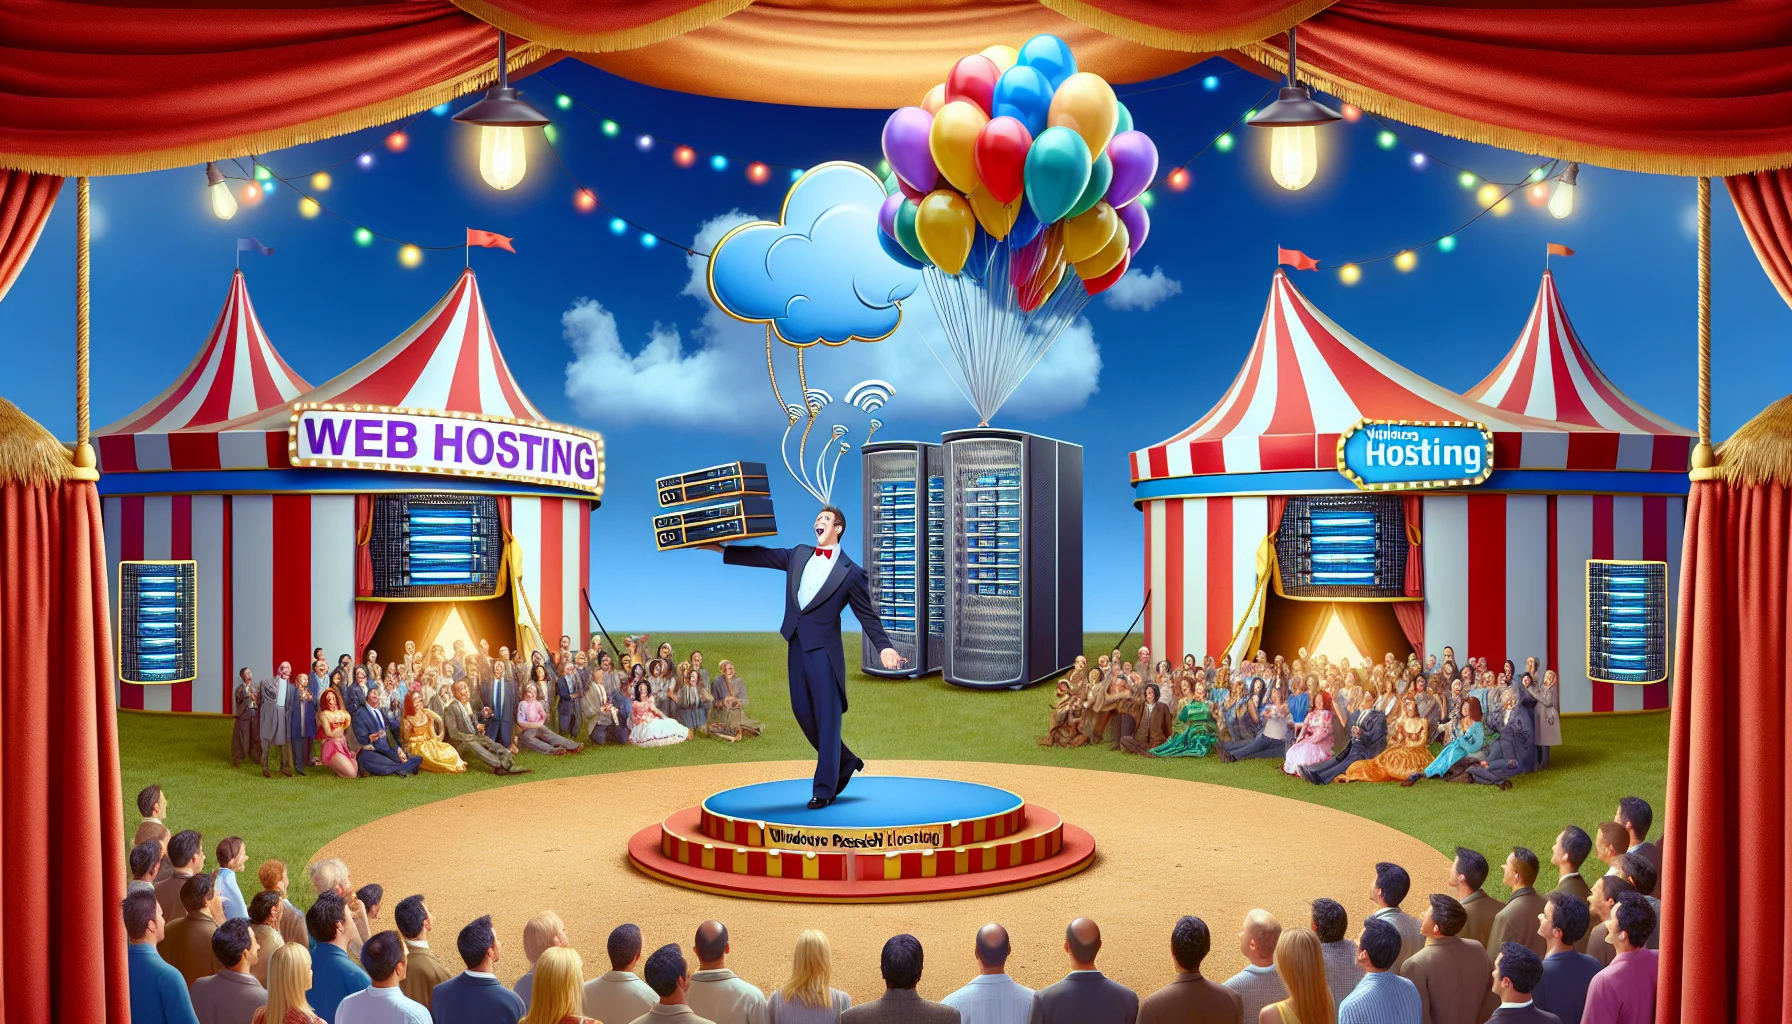 Generate a visually humorous depiction of a web hosting scenario. Show an imaginative and colorful circus scene with a Caucasian male ringmaster animatedly selling 'Windows Reseller Hosting' tickets to a diverse crowd of people. The tickets are elegantly designed to look like miniature servers and toolbox tickets to symbolize 'web hosting' and 'reseller hosting.' In the background, various high-tech tents serve as data centers, with ethernet cables connected to balloons that are floating toward the sky, depicting cloud hosting. Remember to include a sense of lightheartedness and fun to make the concept of web hosting enticing.